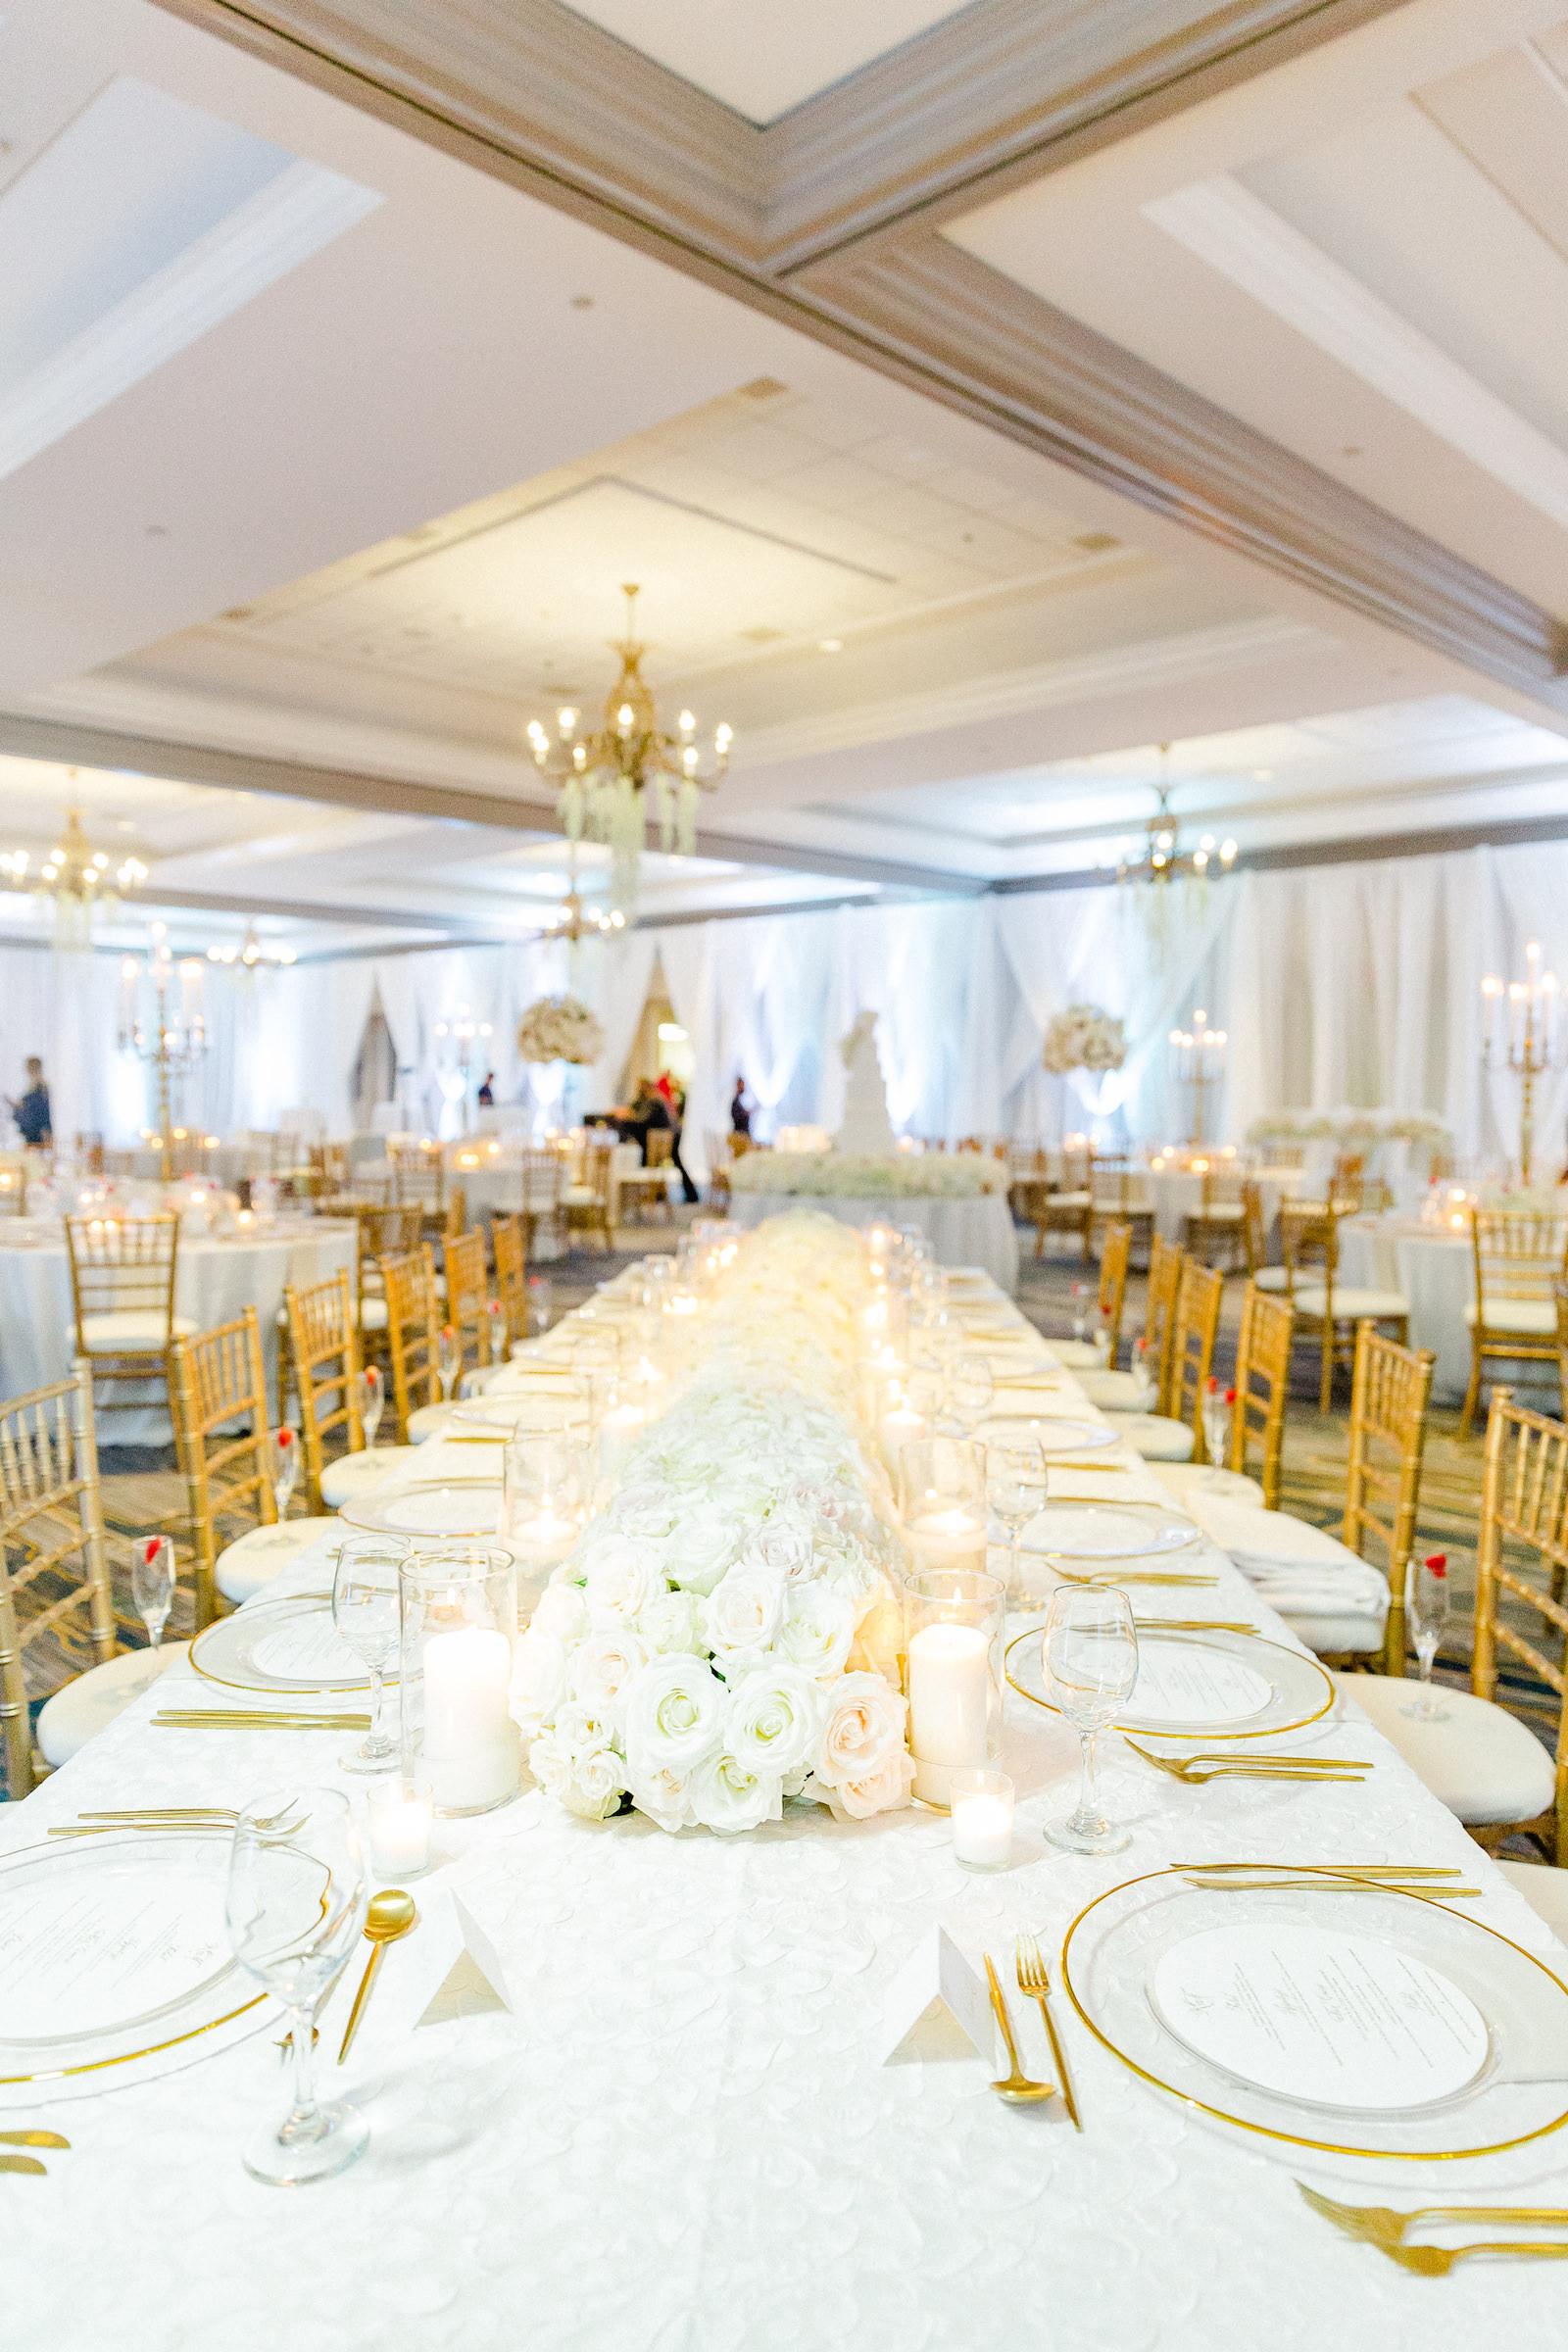 Gold and White Romantic Wedding Reception Decor, Long Feasting Table with White Table Linen, Gold Rimmed and Clear Glass Chargers, Gold Flatware, Gold Chiavari Chairs, White Roses and Hydrangeas Floral Centerpiece and Candles | Tampa Bay Wedding Florist Botanica International Design Studio